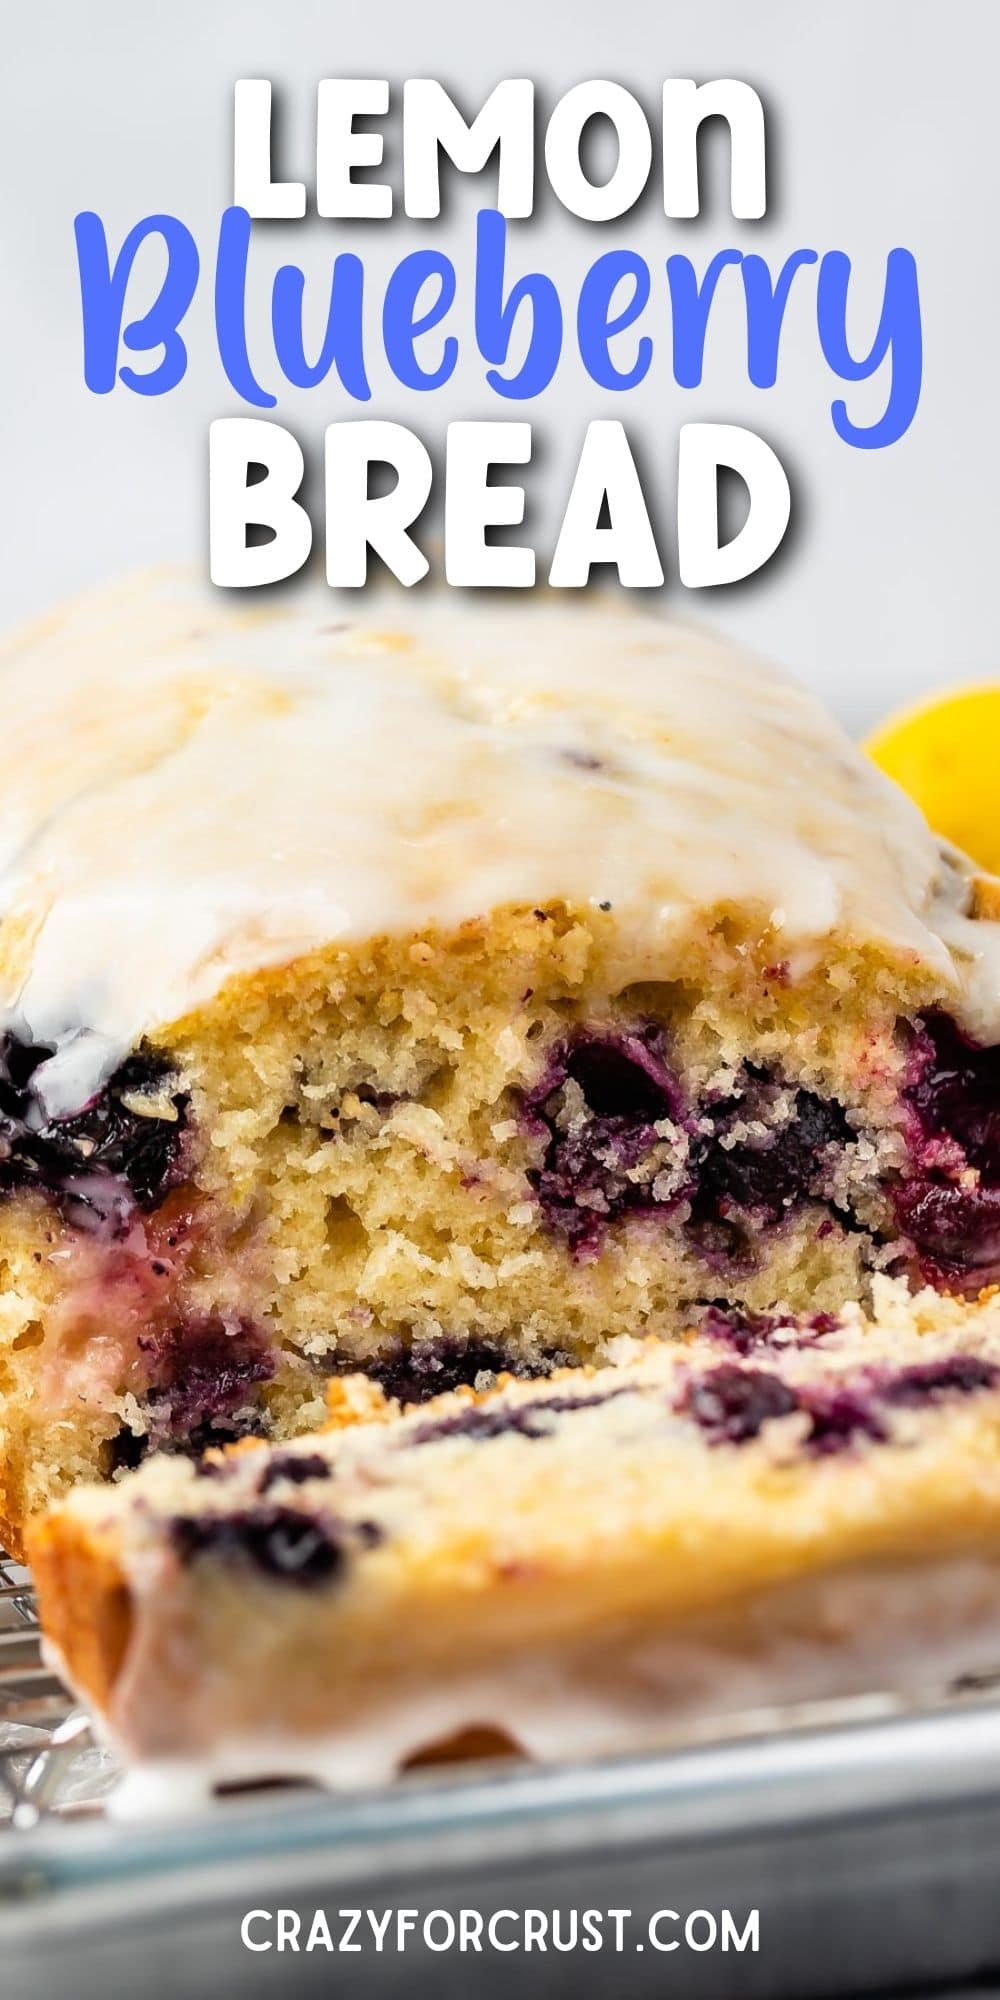 Lemon blueberry loaf with one slice cut off and recipe title on top of image